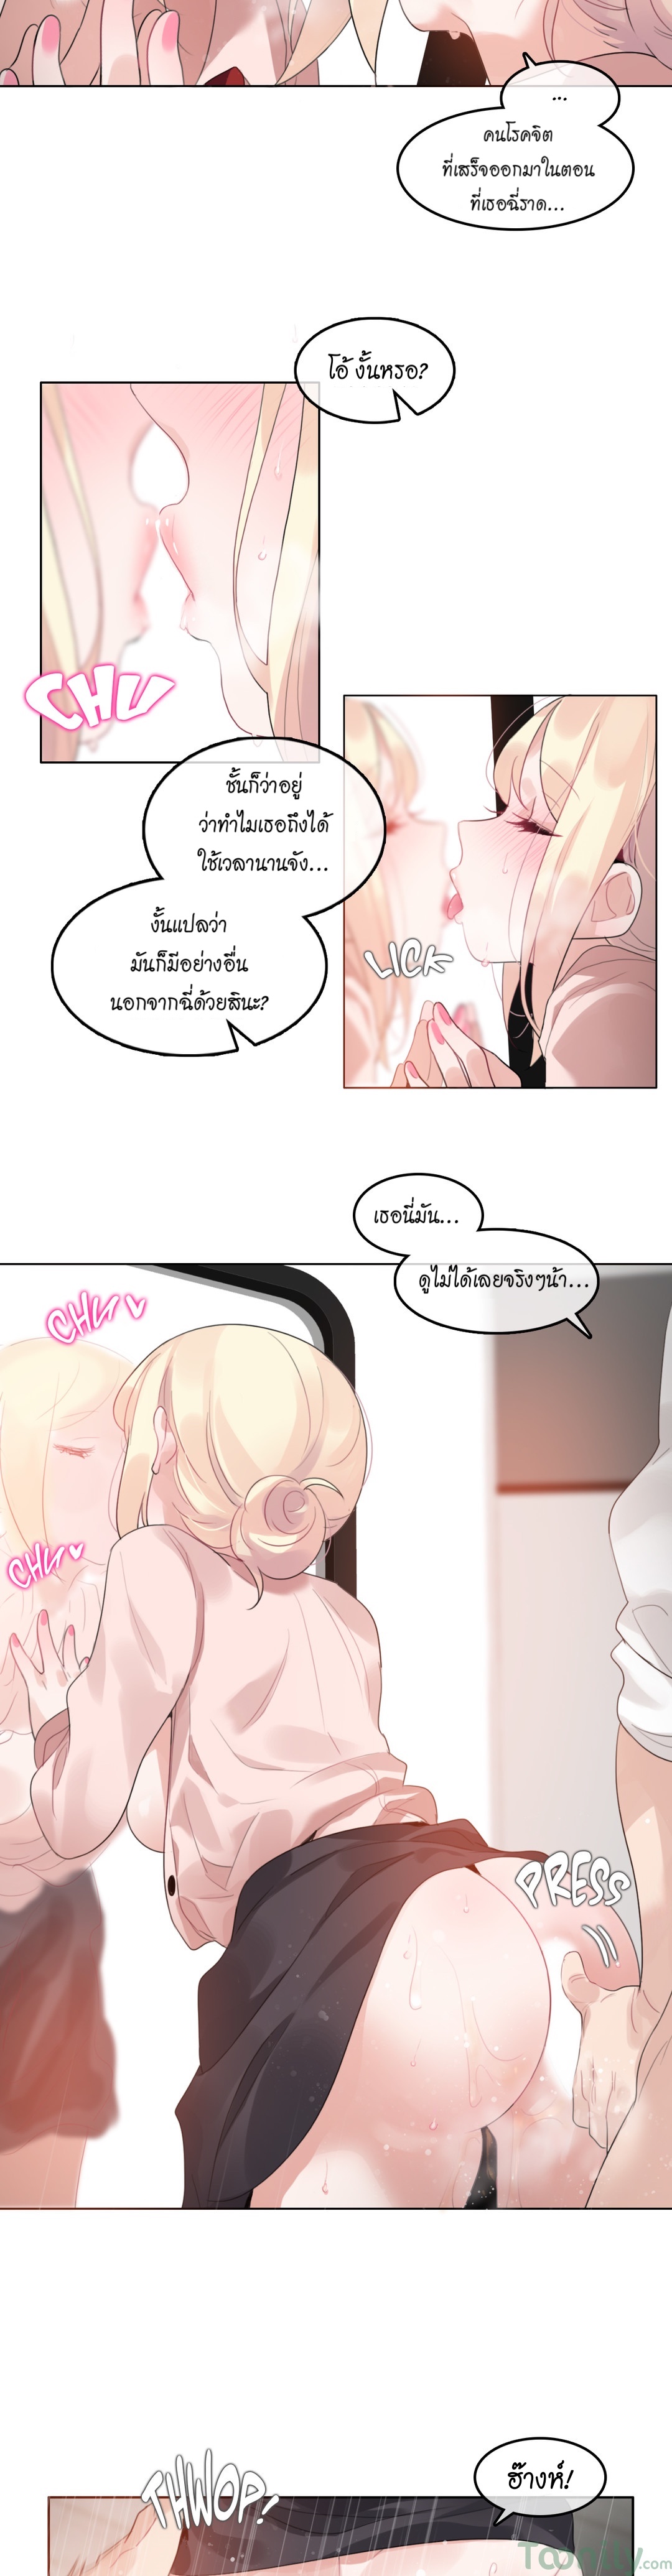 A Pervert’s Daily Life60 (11)